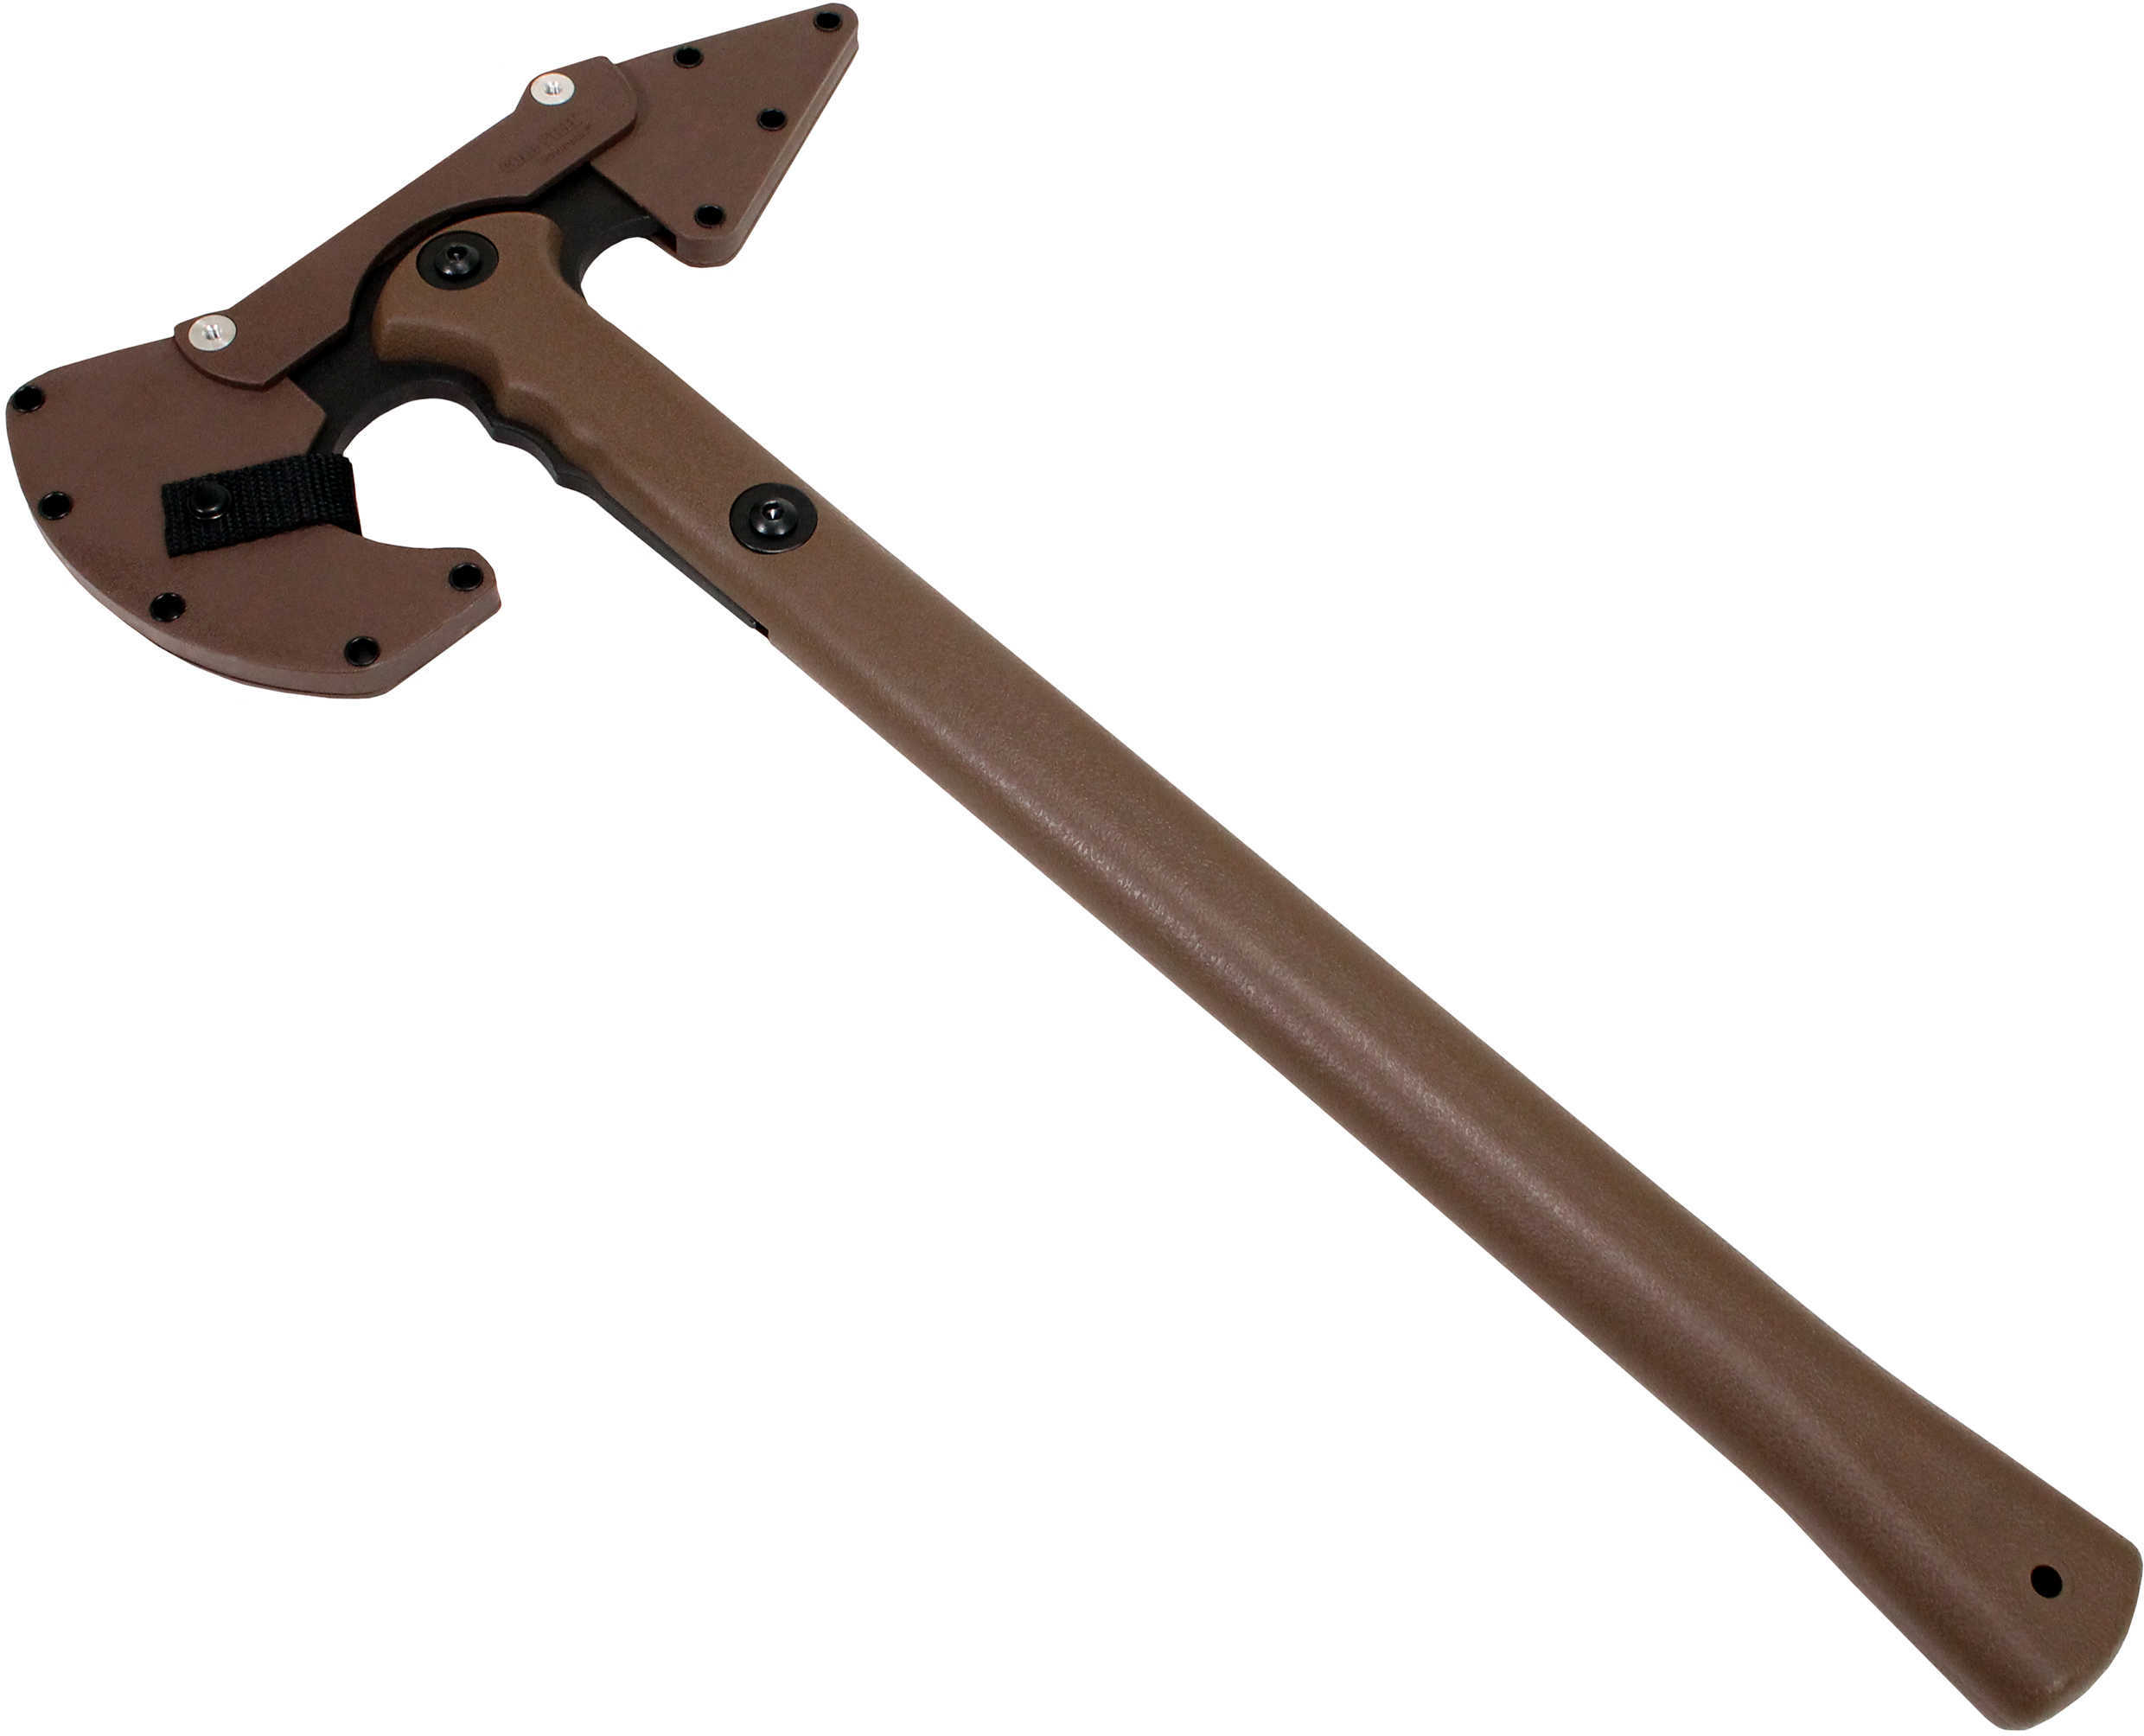 Cold Steel Trench Hawk Flat Dark Earth, Boxed